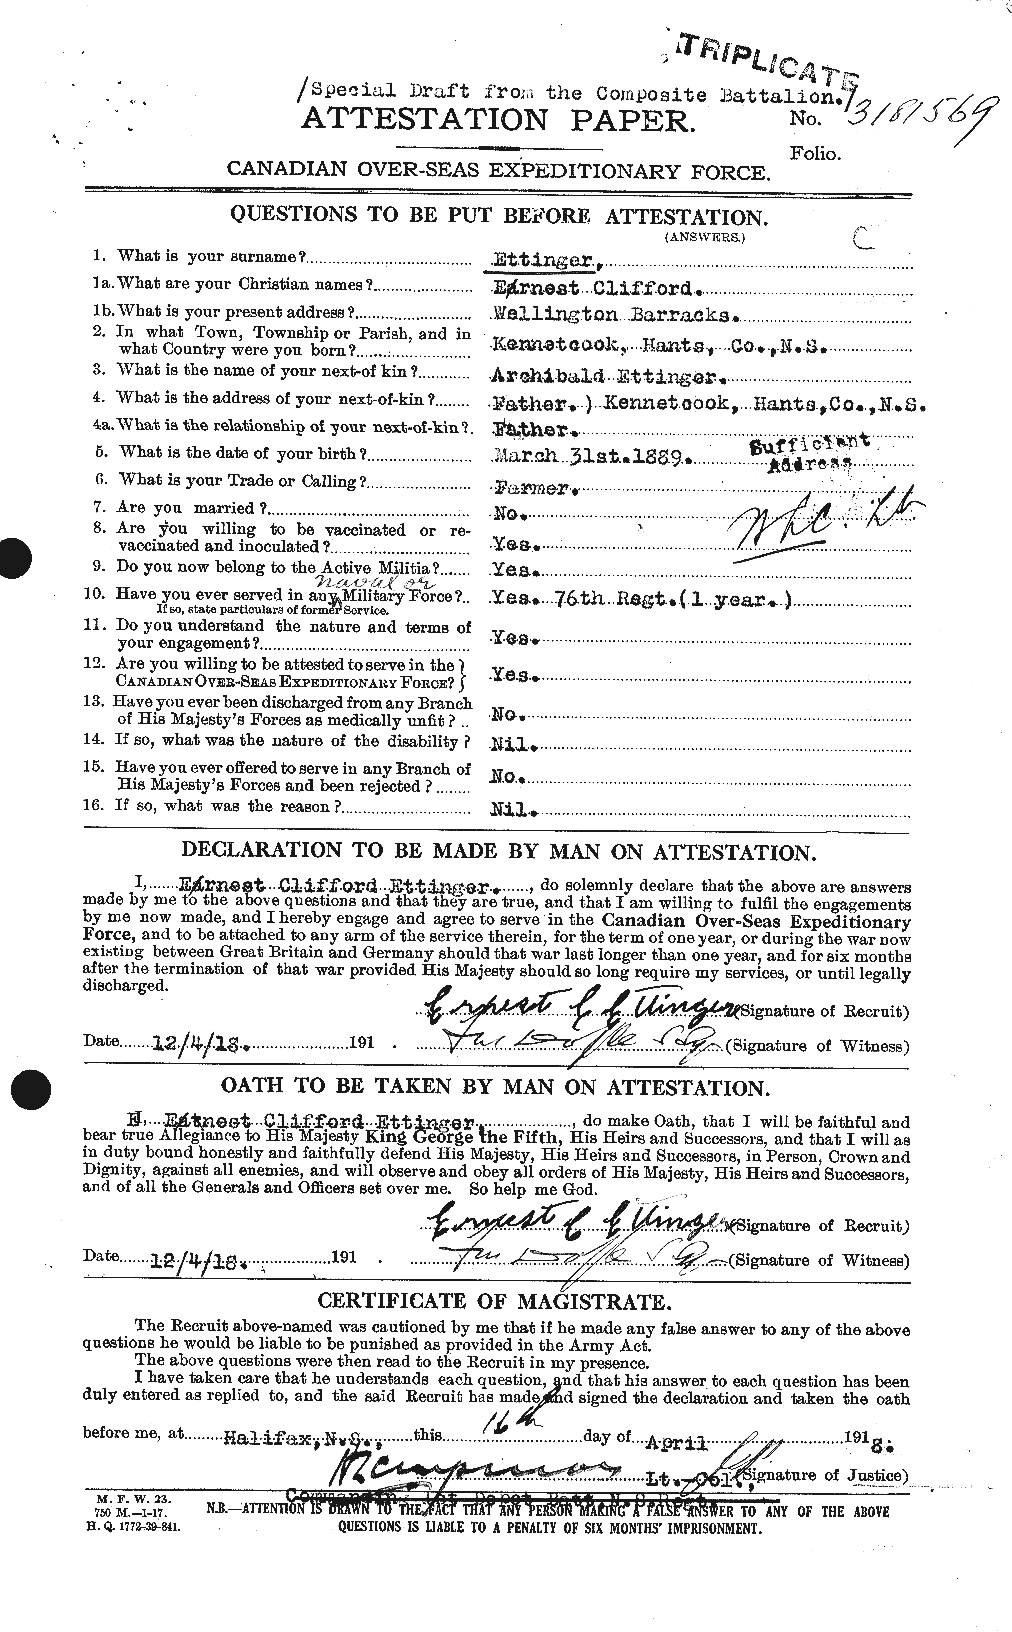 Personnel Records of the First World War - CEF 314765a